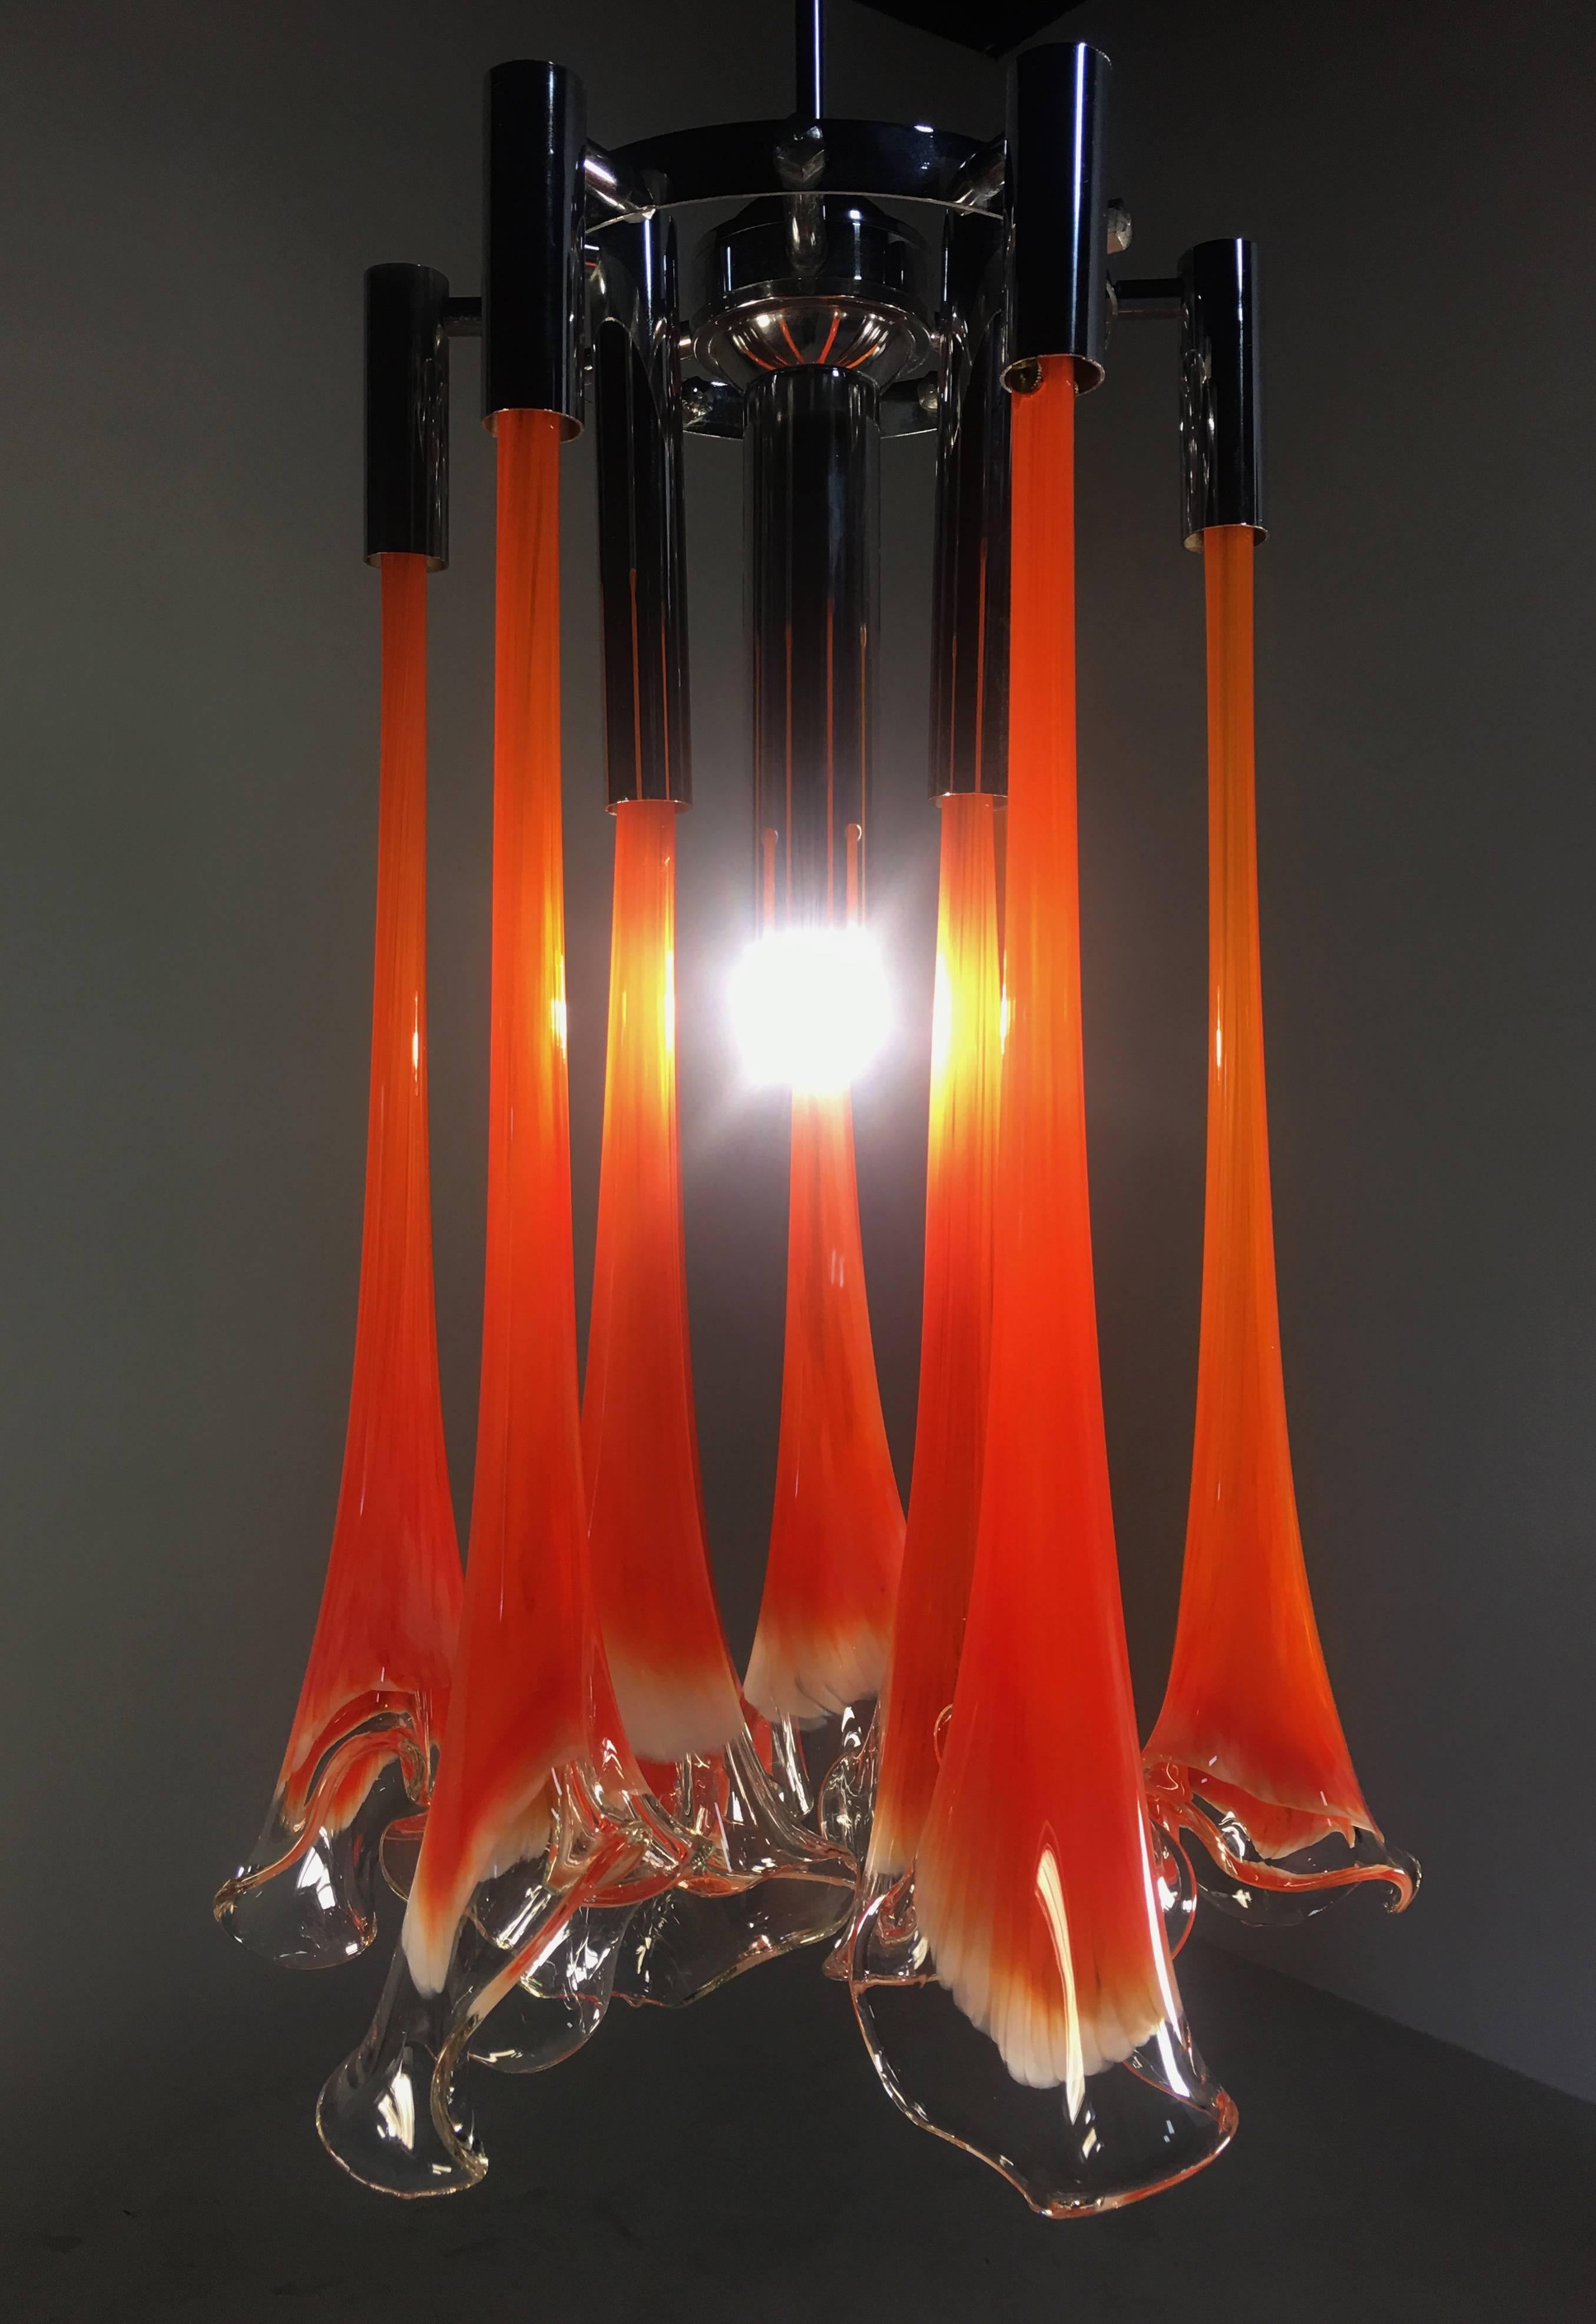 Nine pure Murano glass flowers, a Murano homage to the famous singer visiting the city.